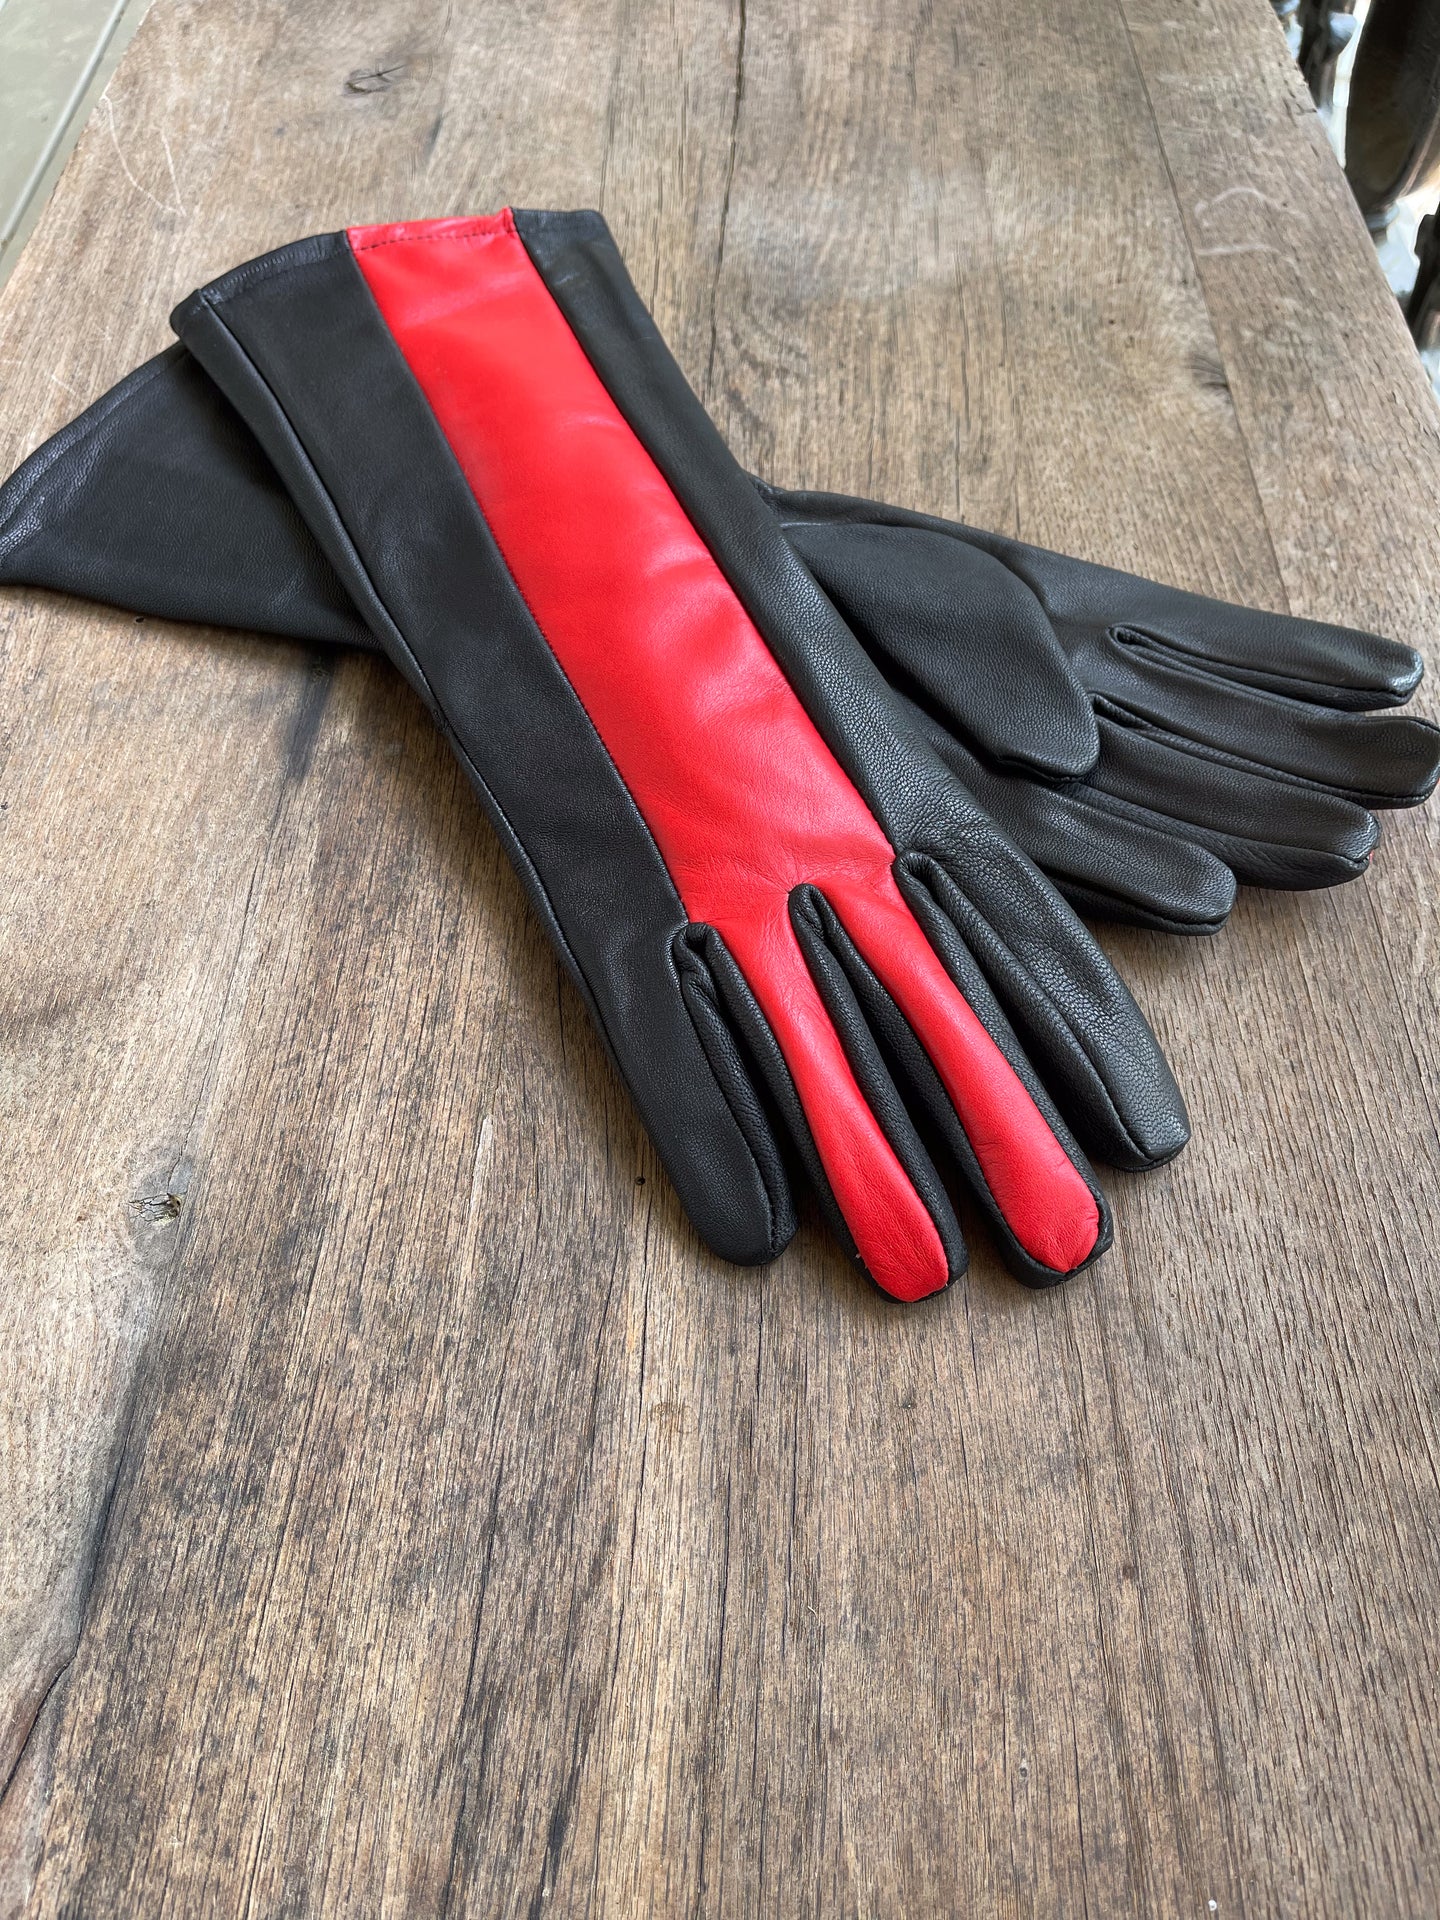 Nightwing Gloves for Cosplay/Red